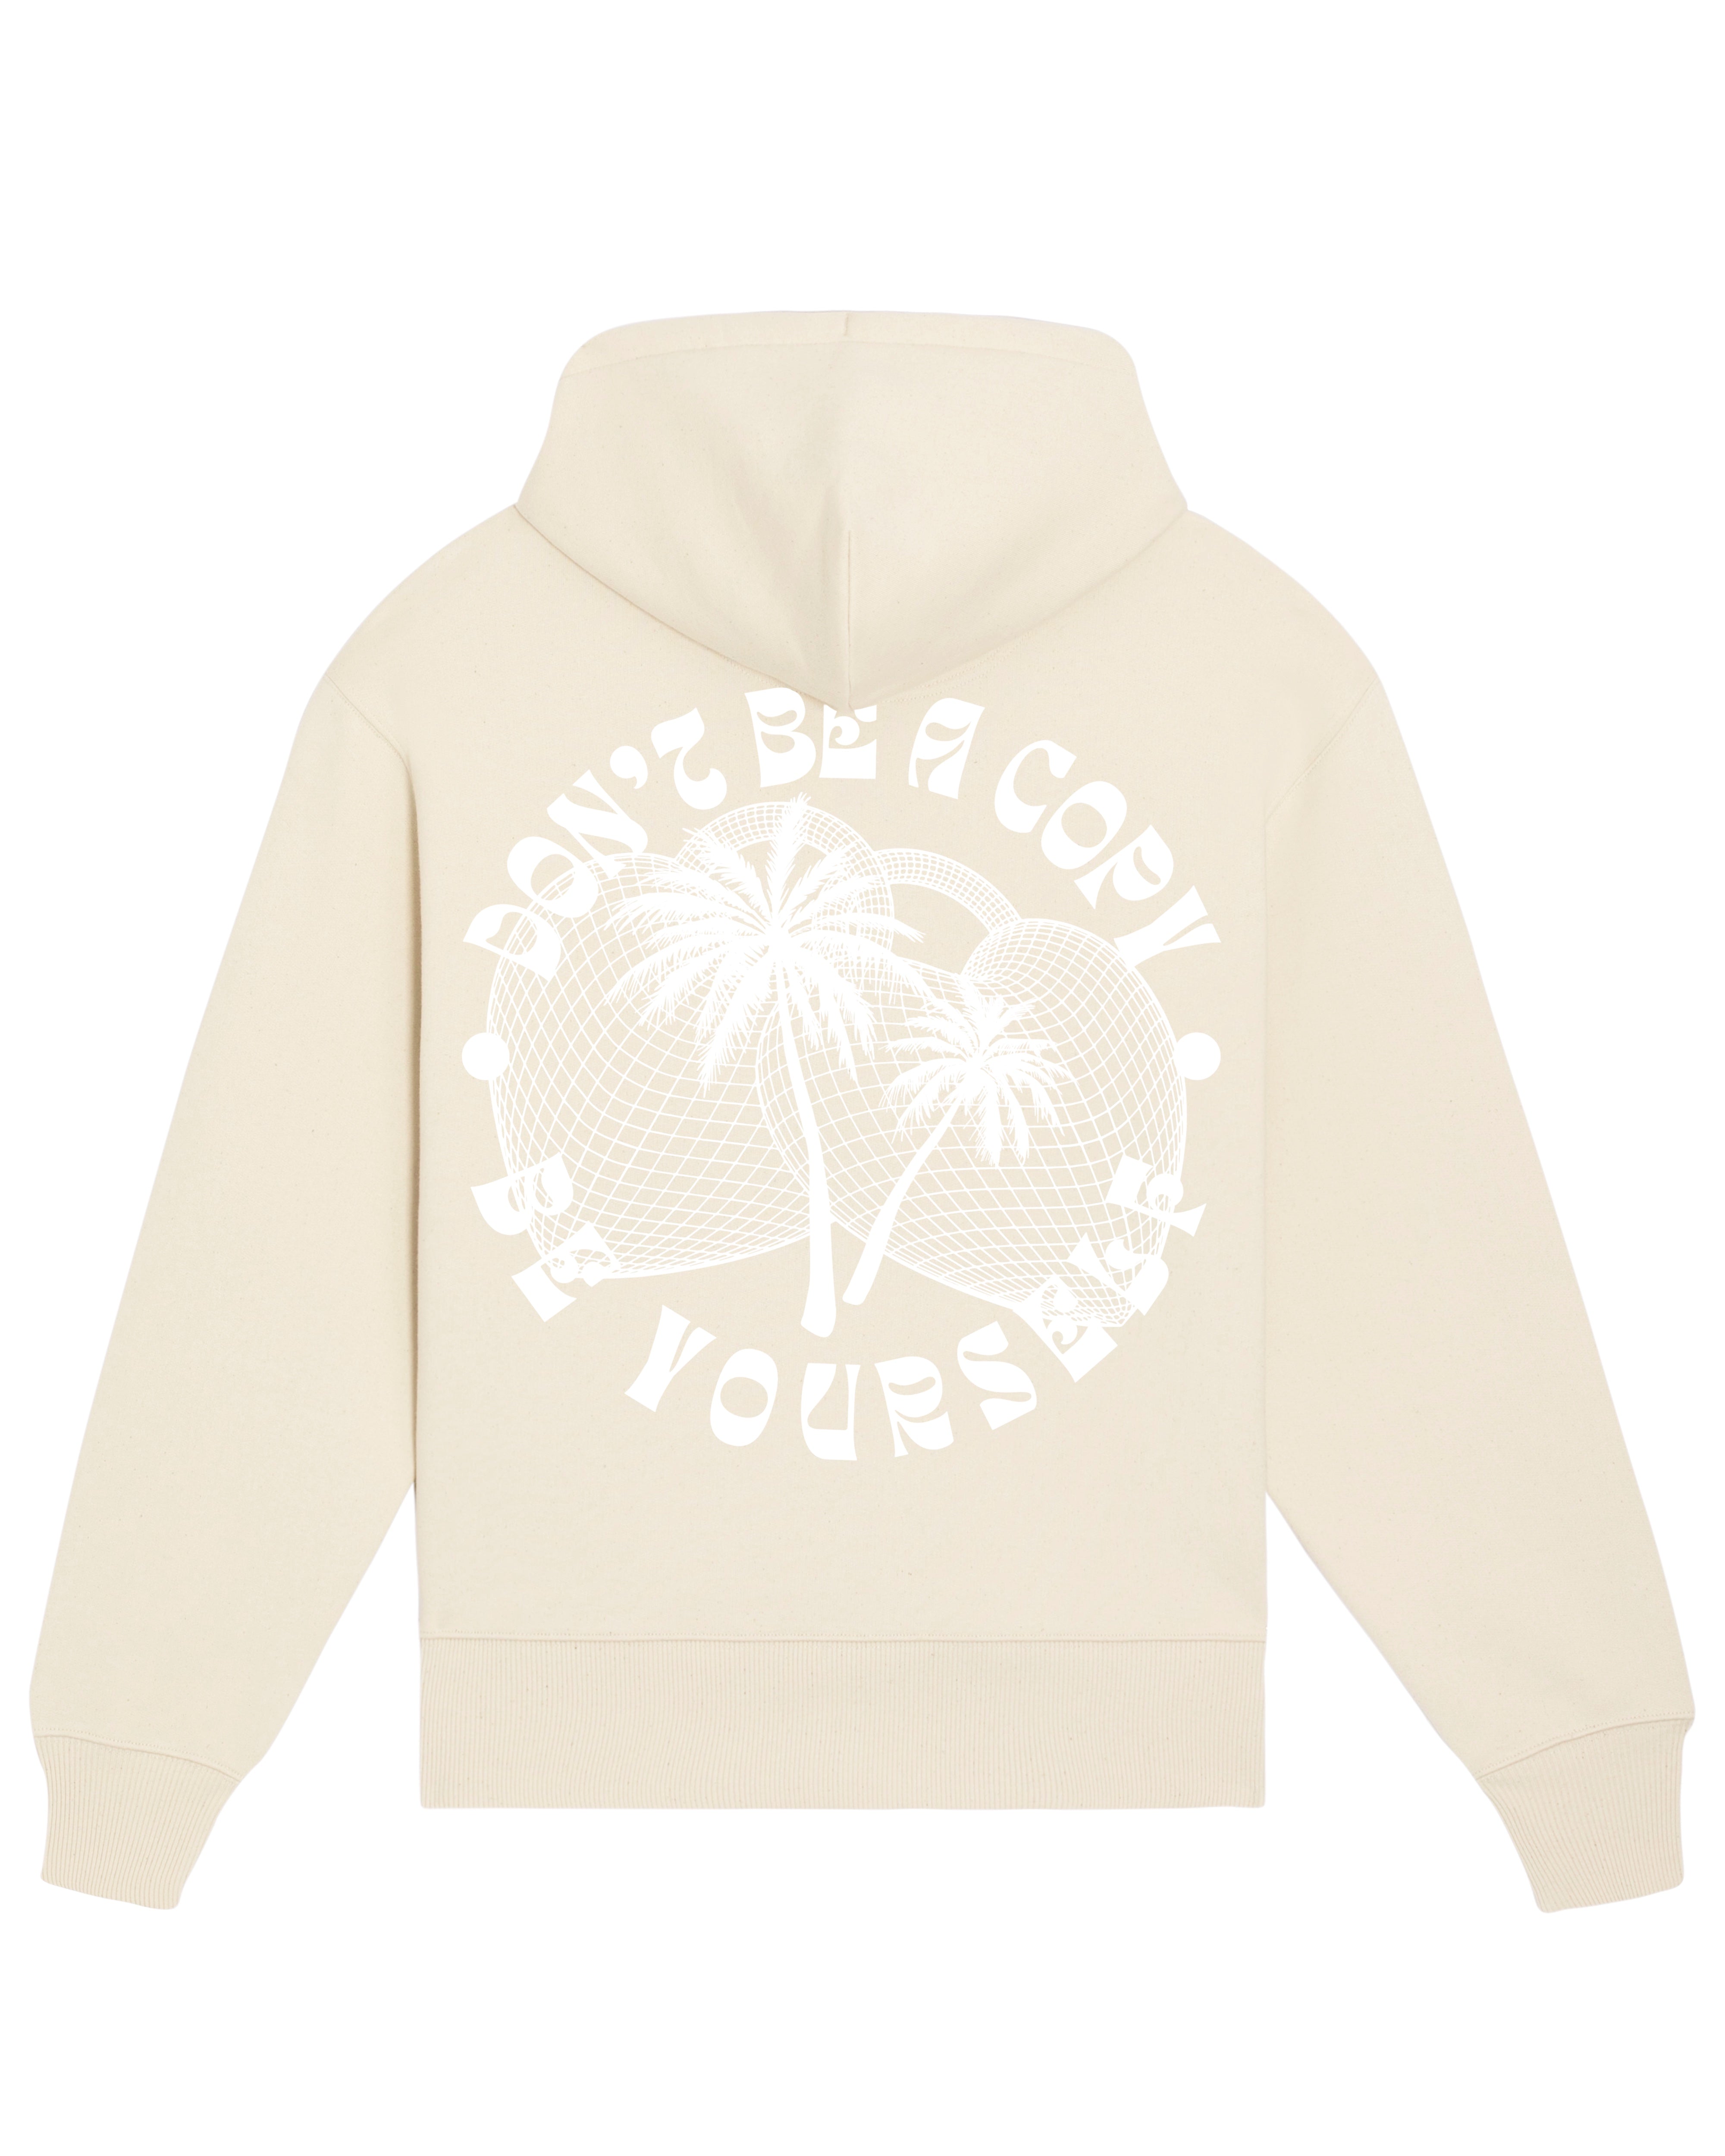 Relaxed fit Hoodie “Don’t be a copy - be yourself”